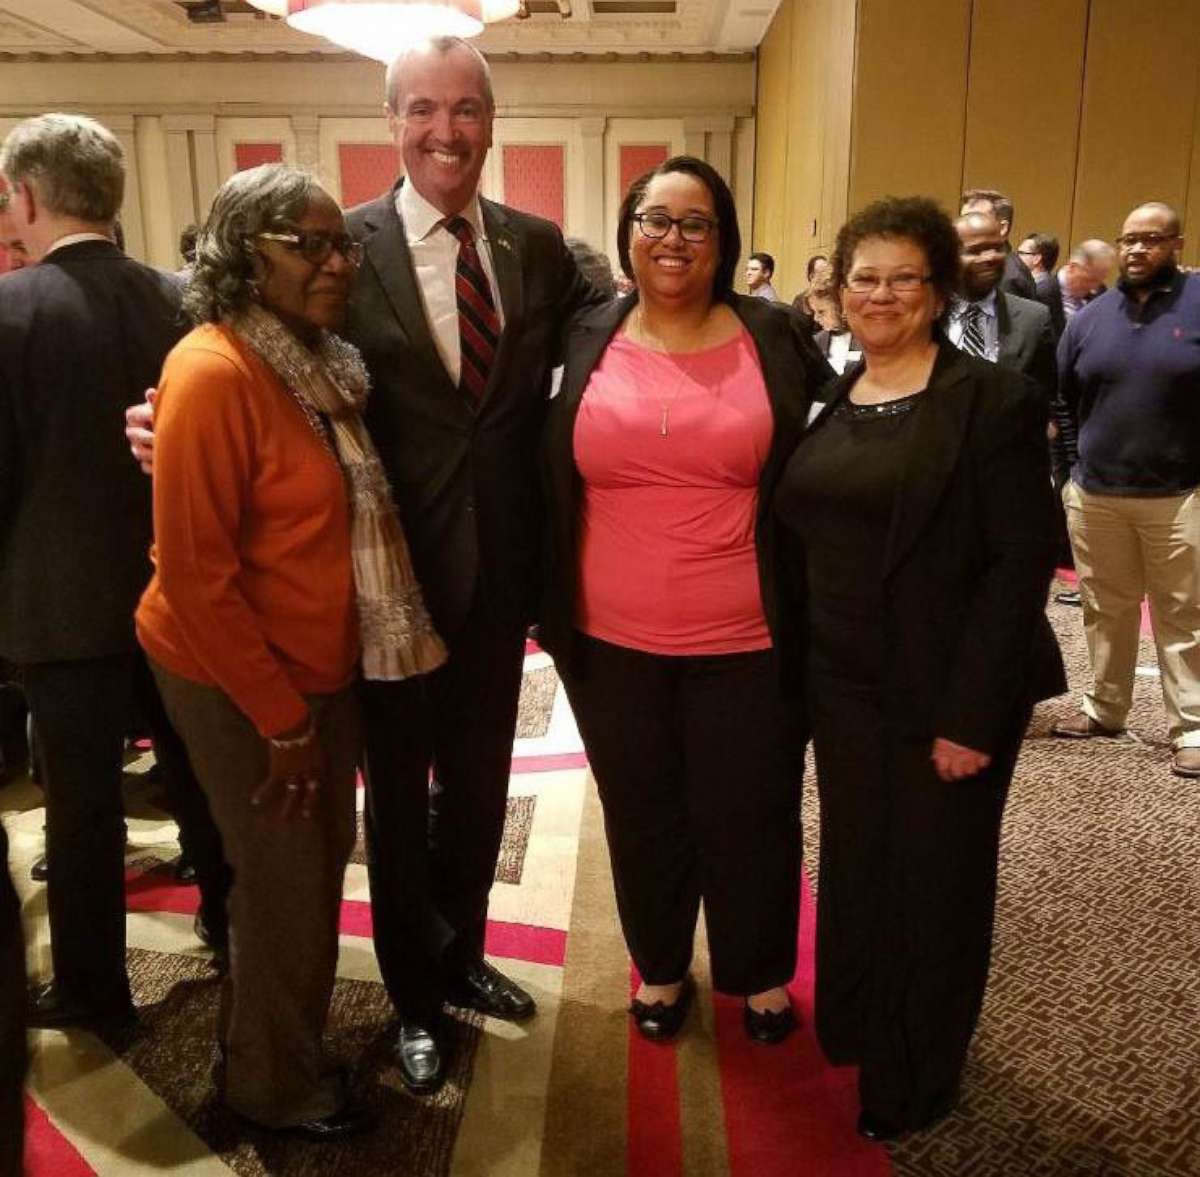 PHOTO: Ashley Bennett is pictured with Pleasantville, New Jersey Municipal Chair Irma Curry, New Jersey Governor-elect Phil Murphy, and her mother. 